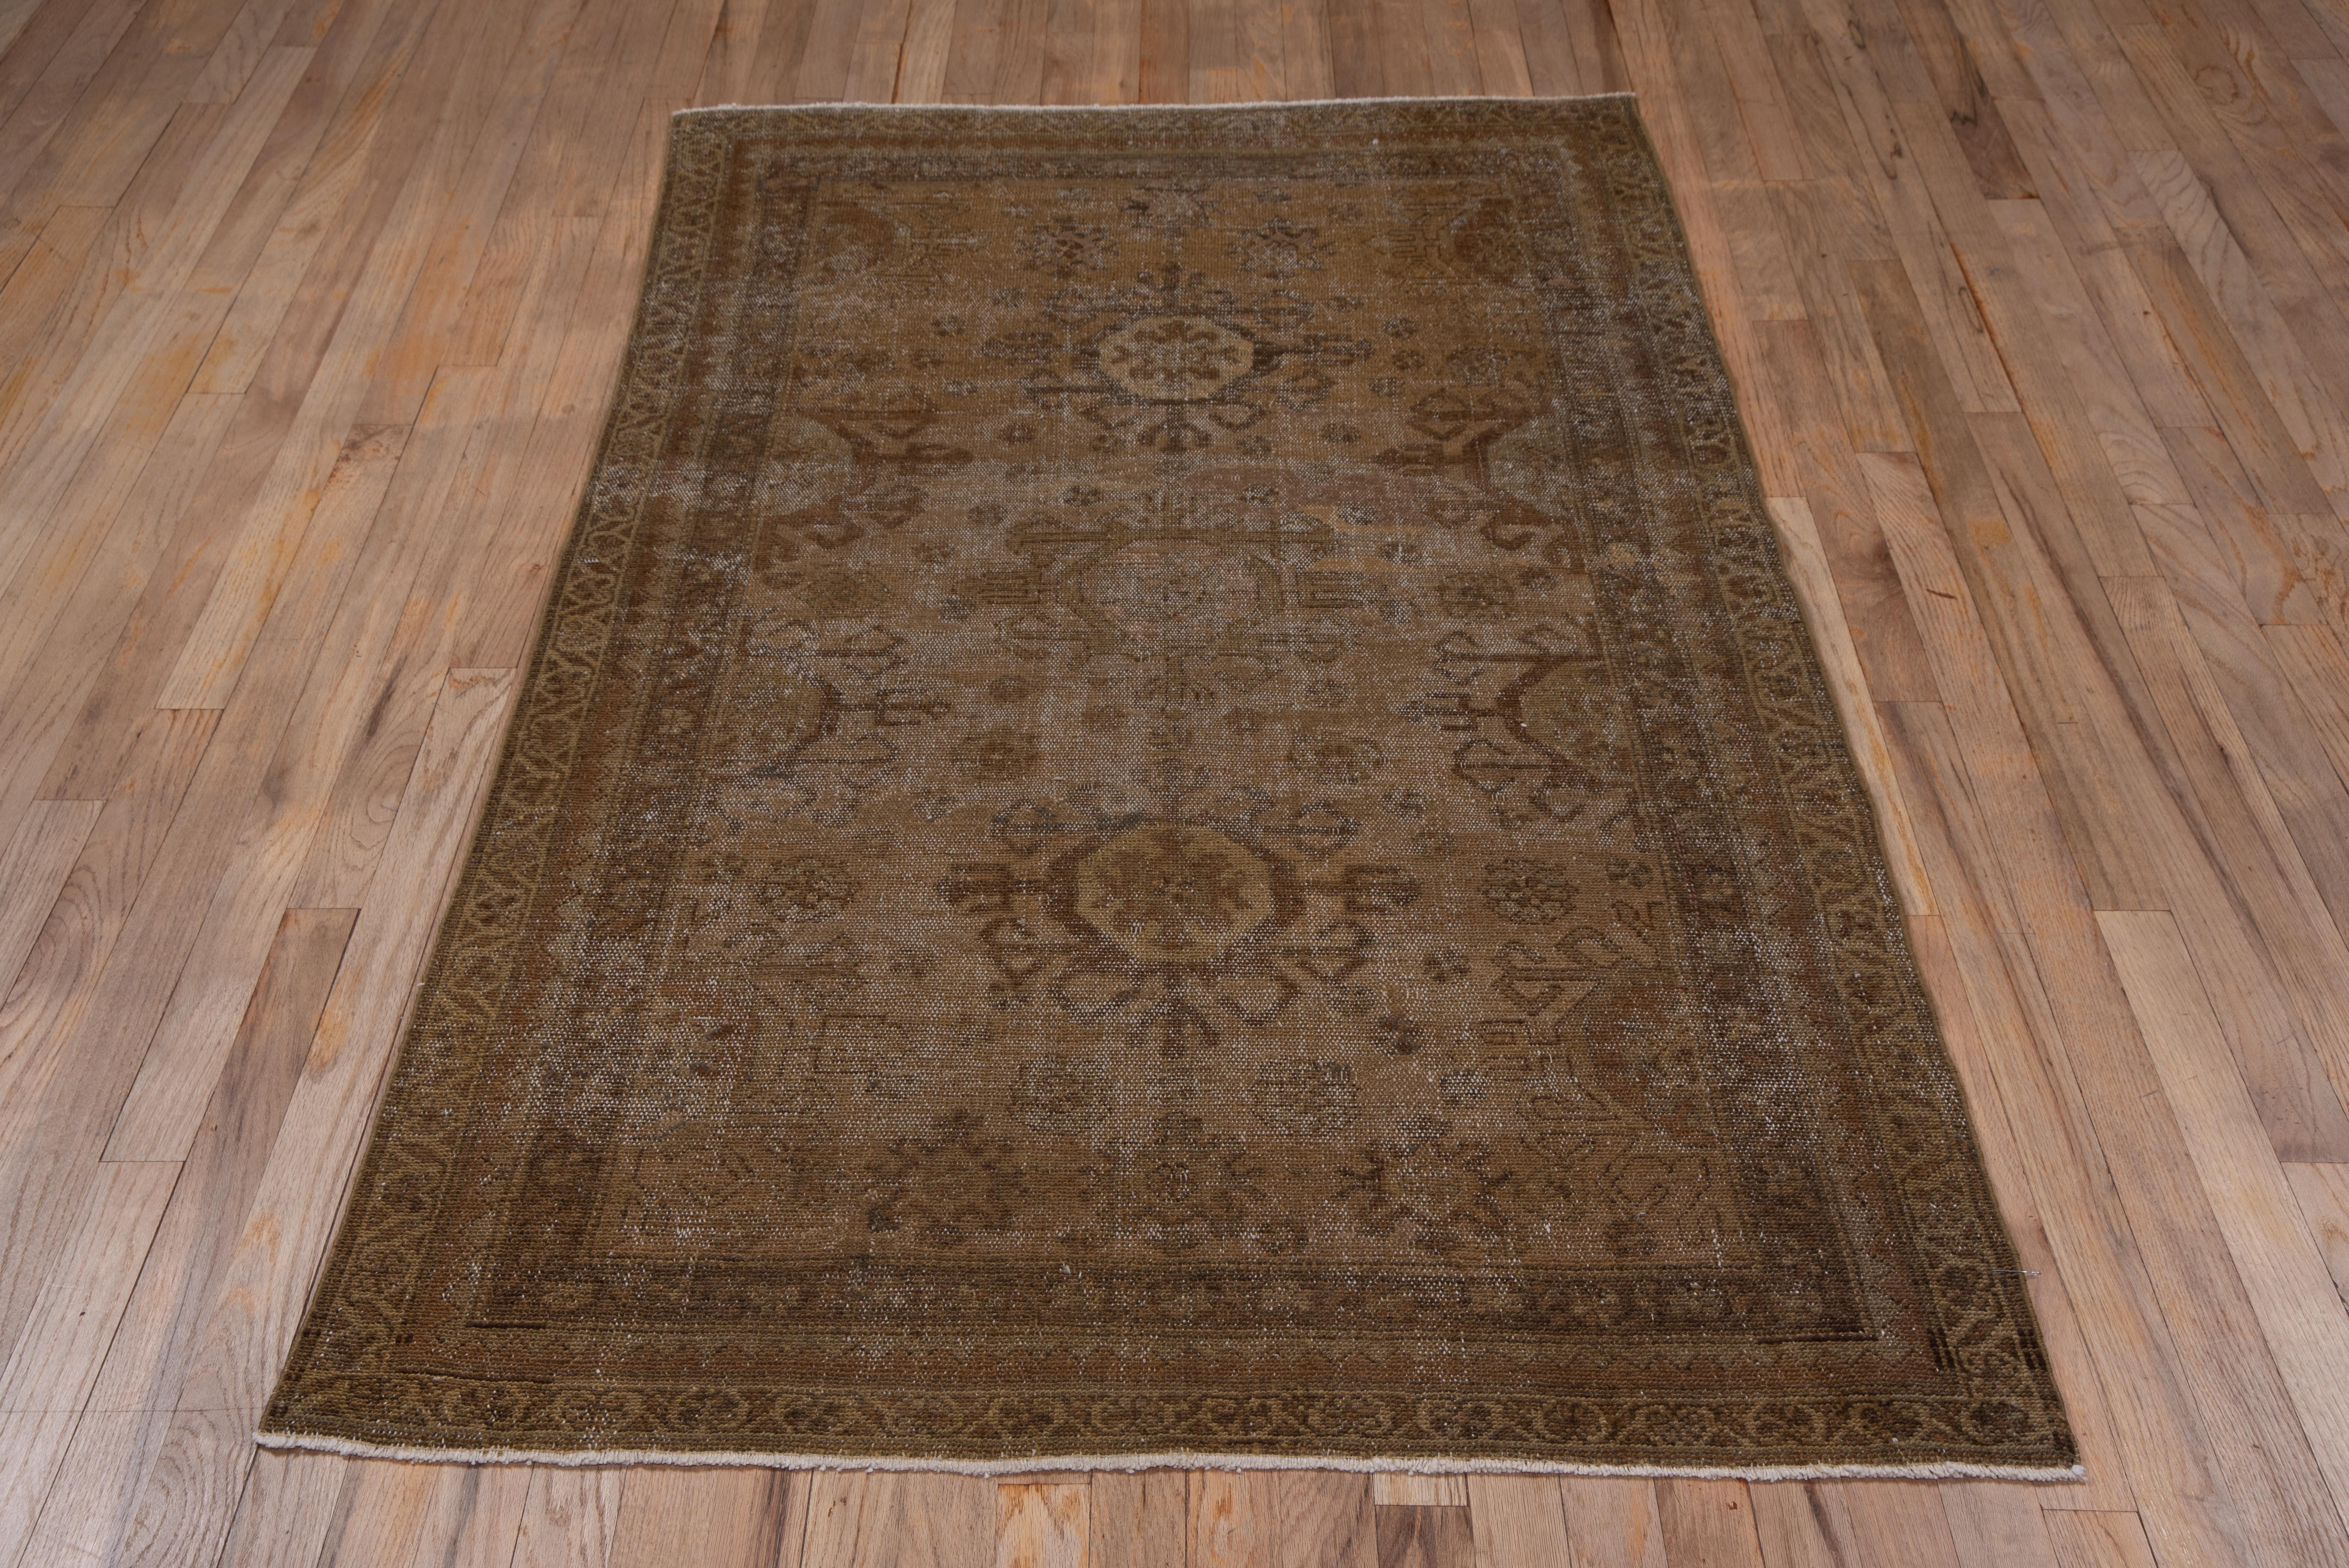 This distressed, earth-tone scatter features a light brown-buff field with three hooked octagons in rust, straw and camel, with fractional medallions along the sides.